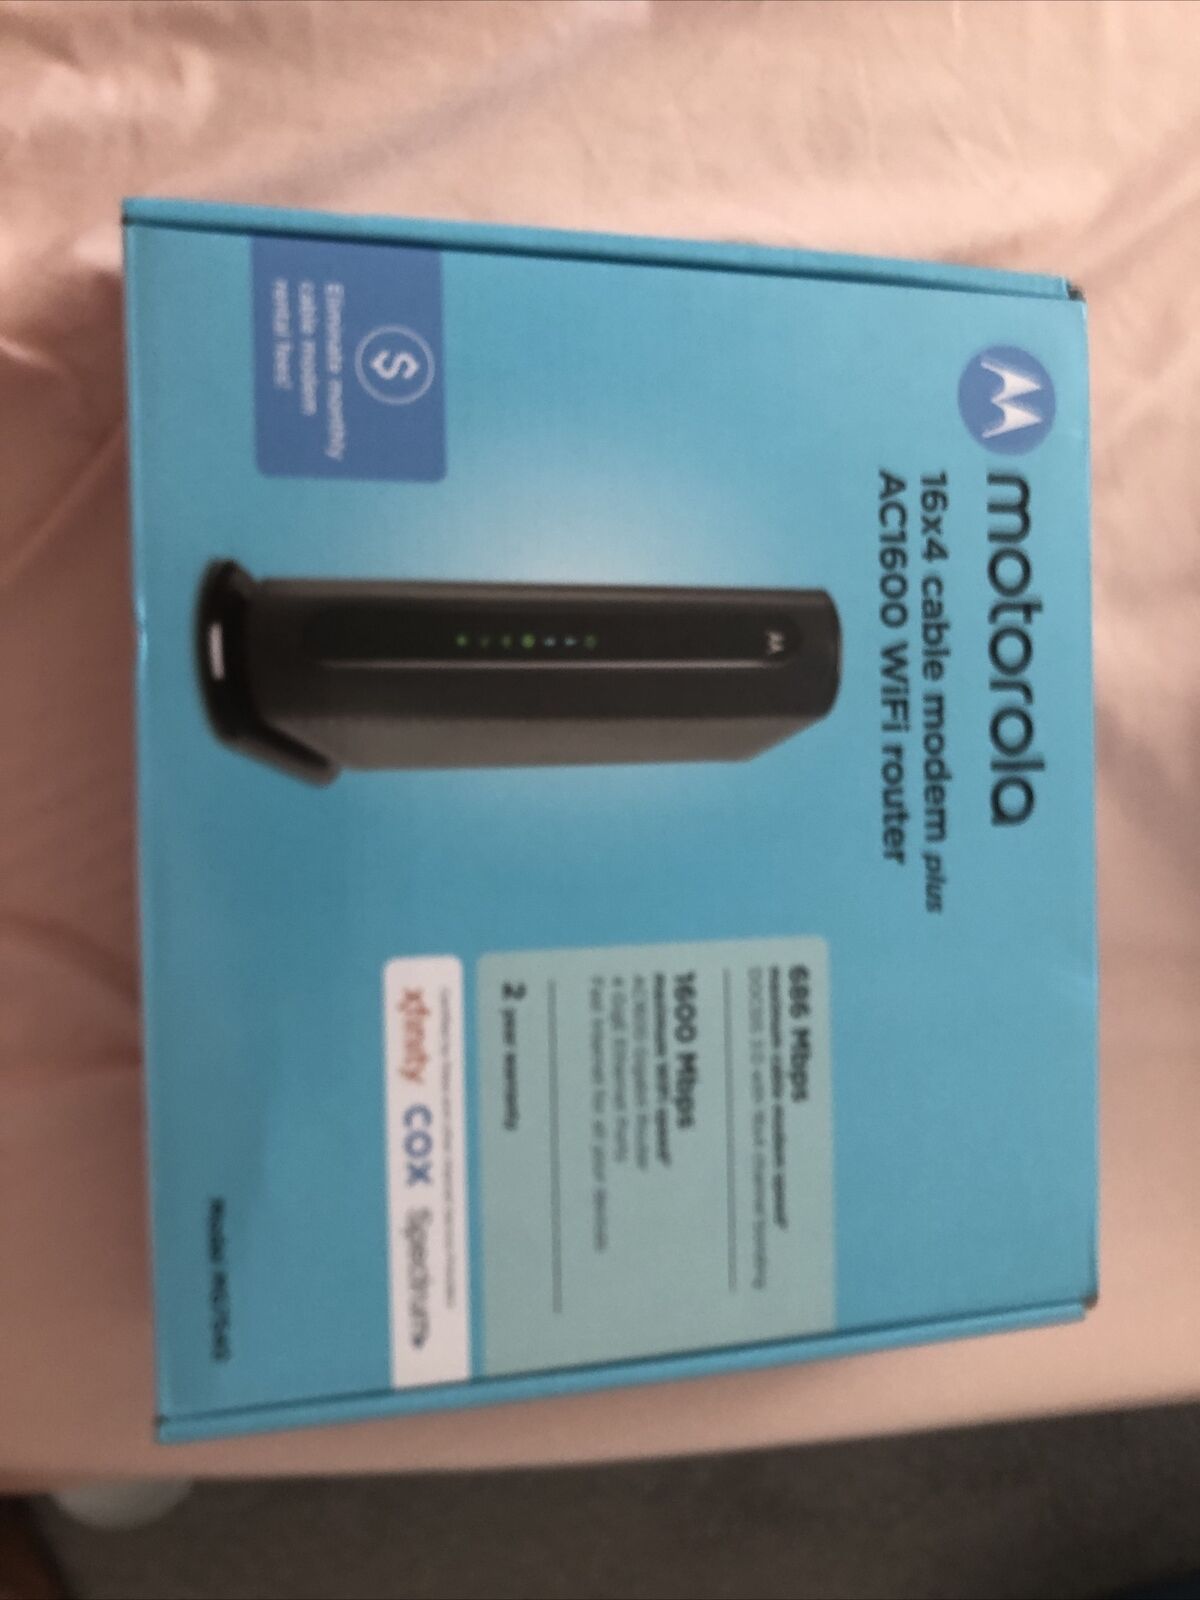 Motorola MG7540 16x4 Cable Modem Plus AC1600 WiFi Router, Pre-Owned